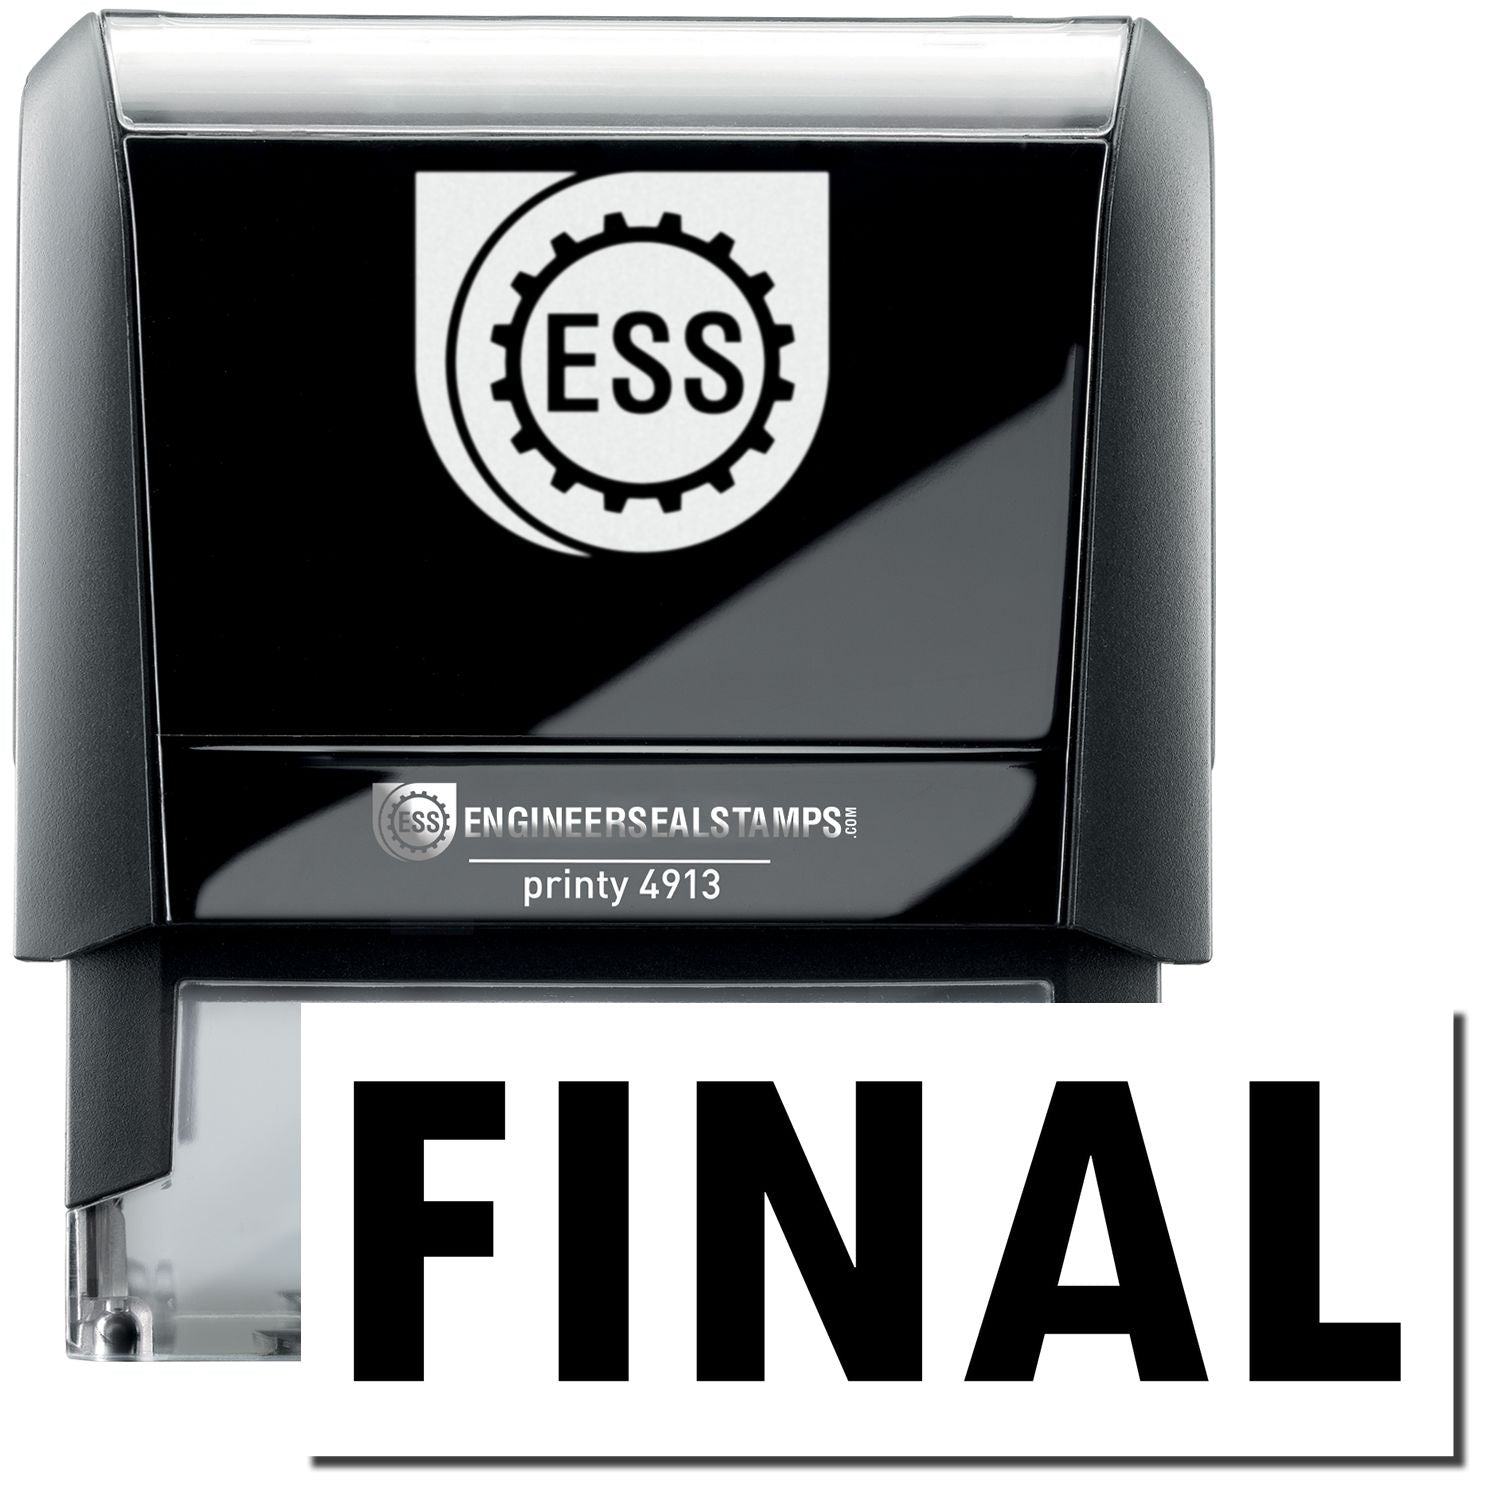 A self-inking stamp with a stamped image showing how the text "FINAL" in a large bold font is displayed by it.